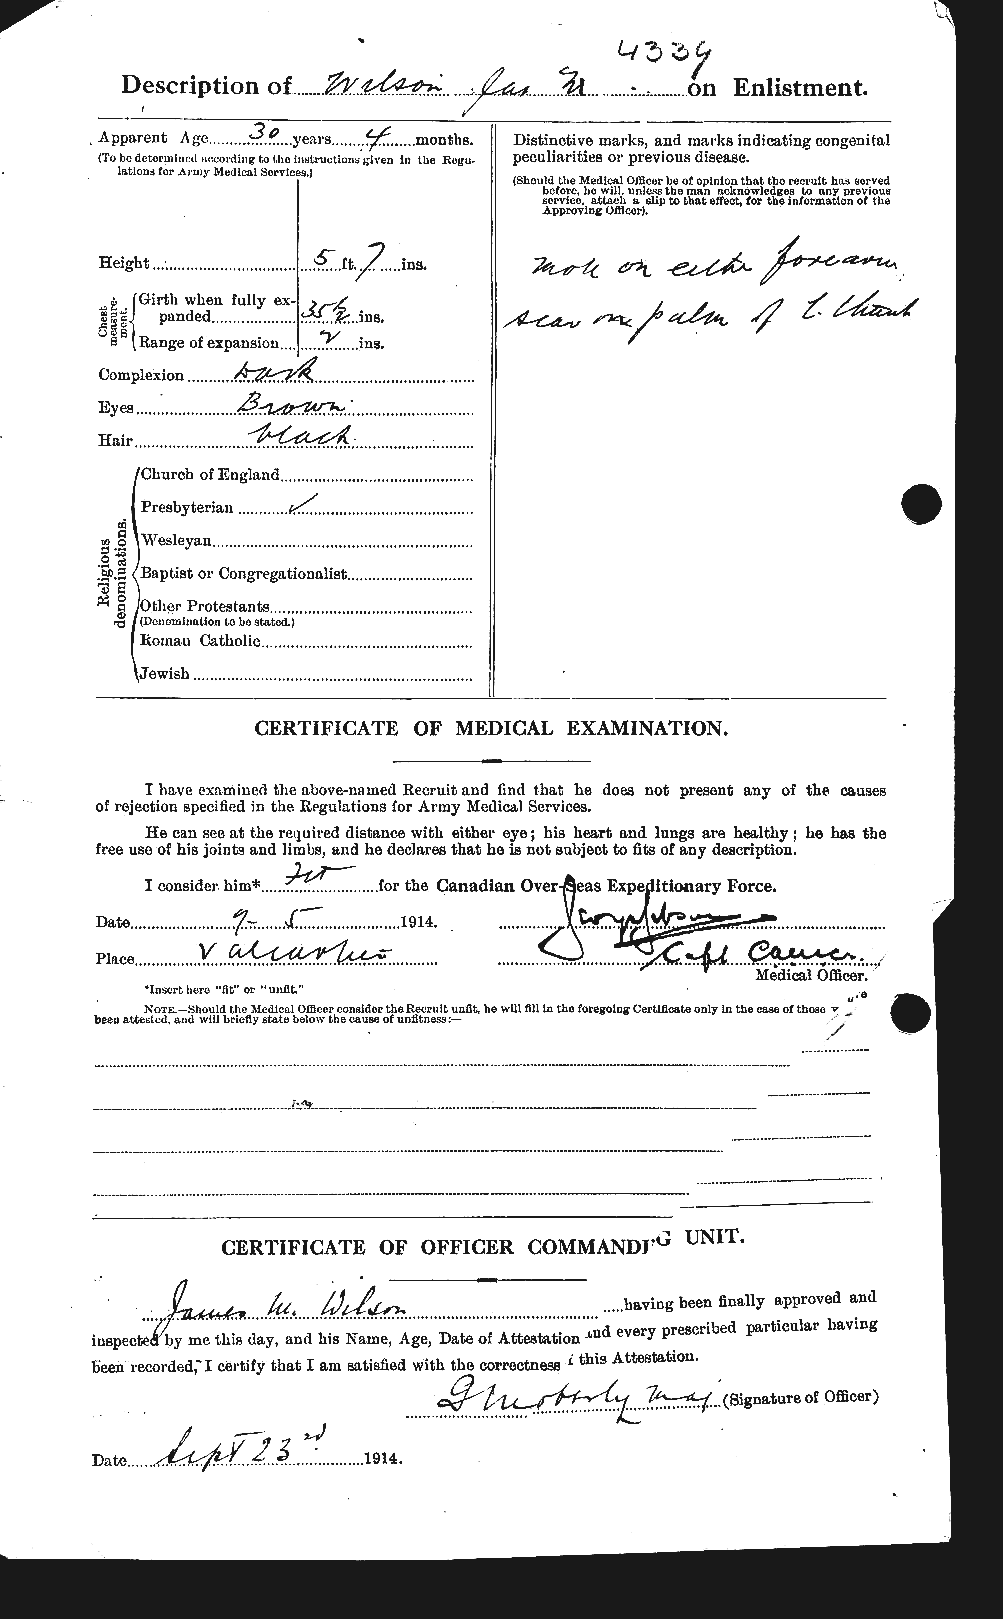 Personnel Records of the First World War - CEF 681486b